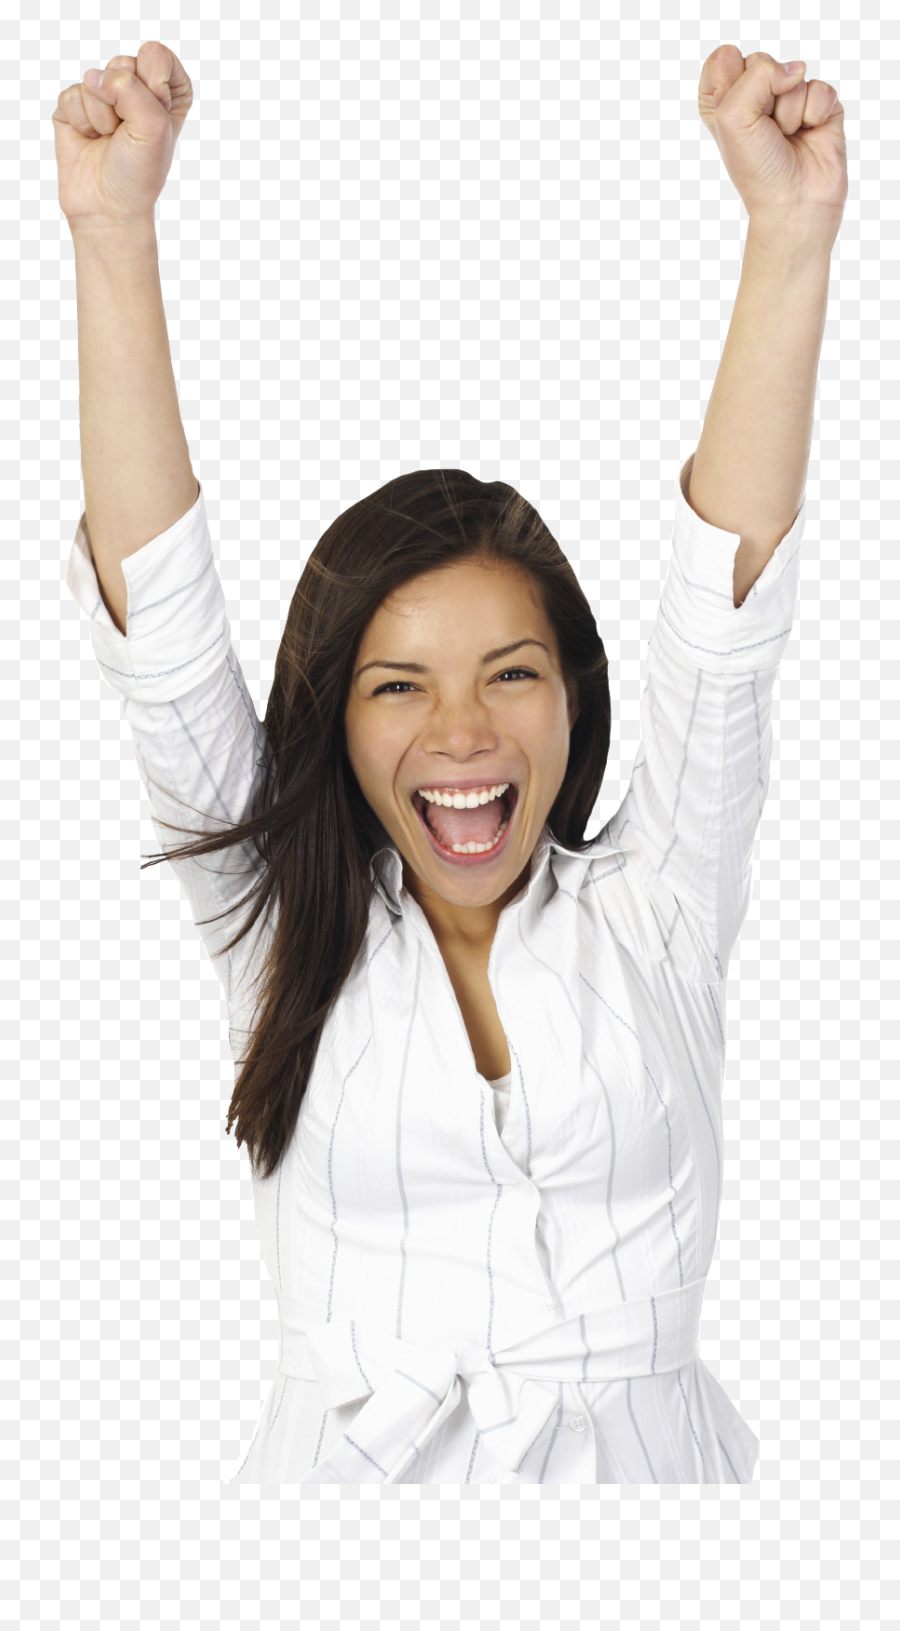 Thumbs Up Emoji - Happy People Studying Hd Png Download Smiling Girl Transparent,Emoji Thumbs Up